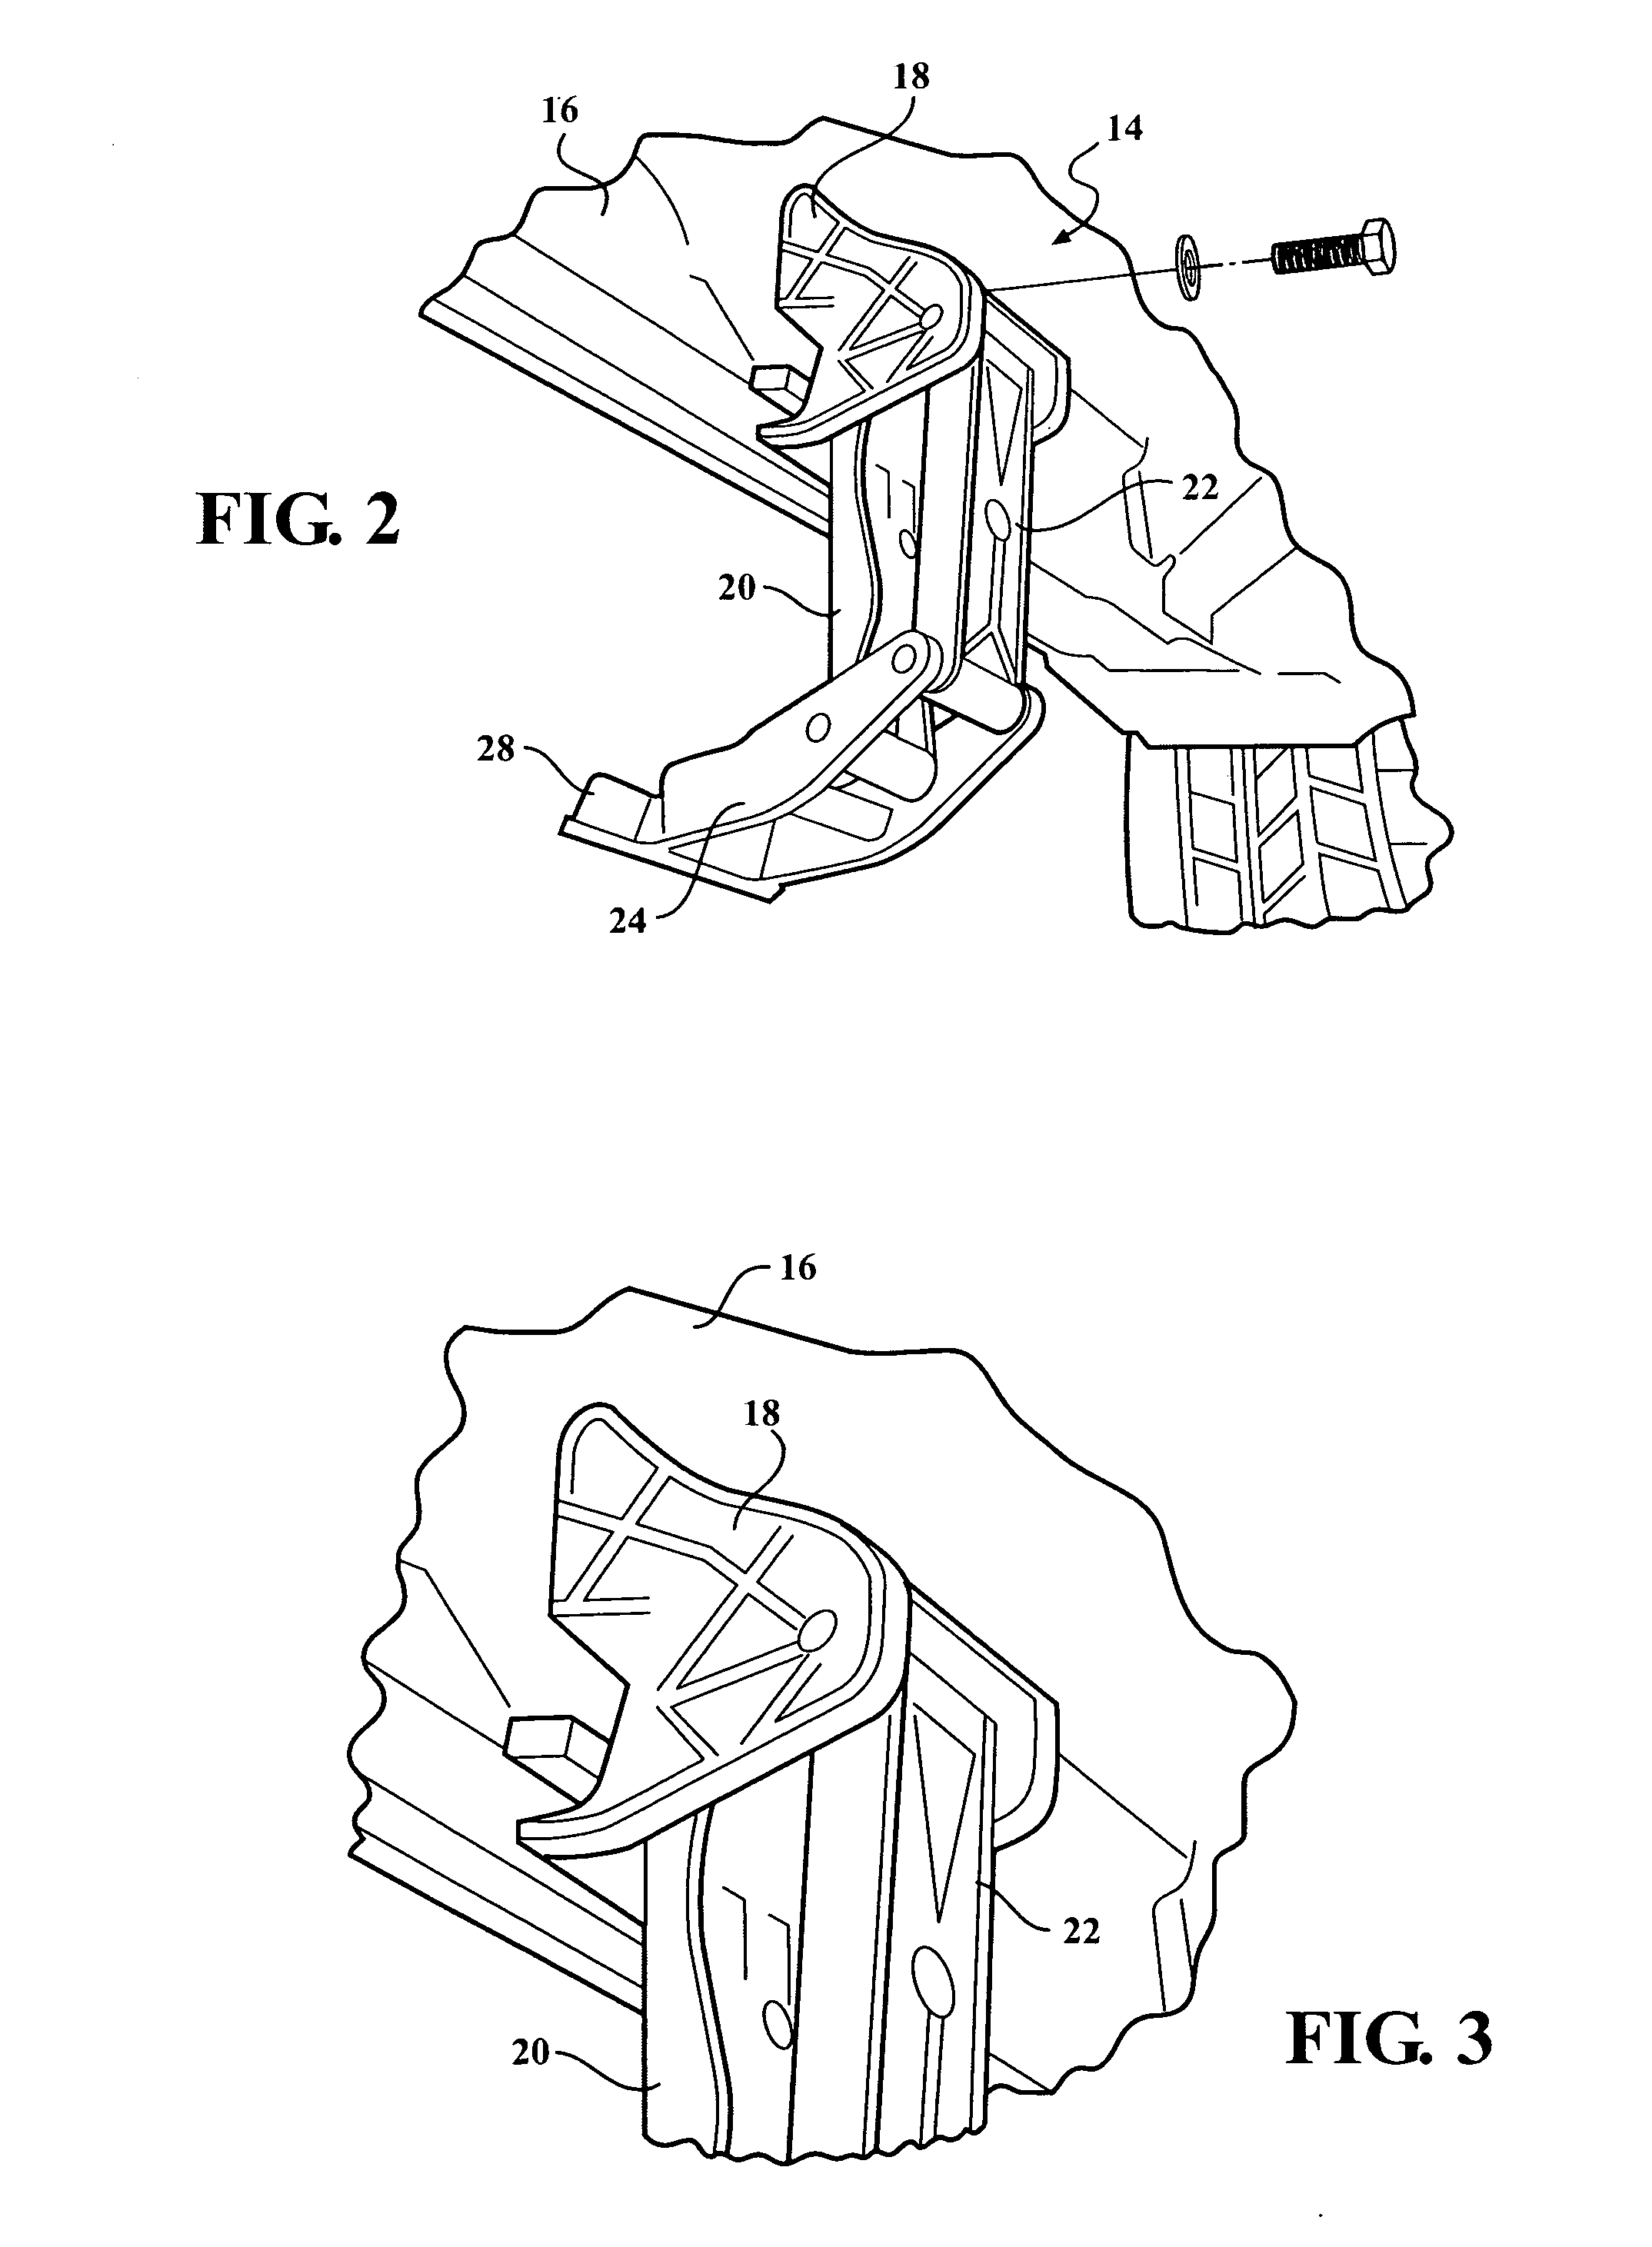 Independent running board actuation